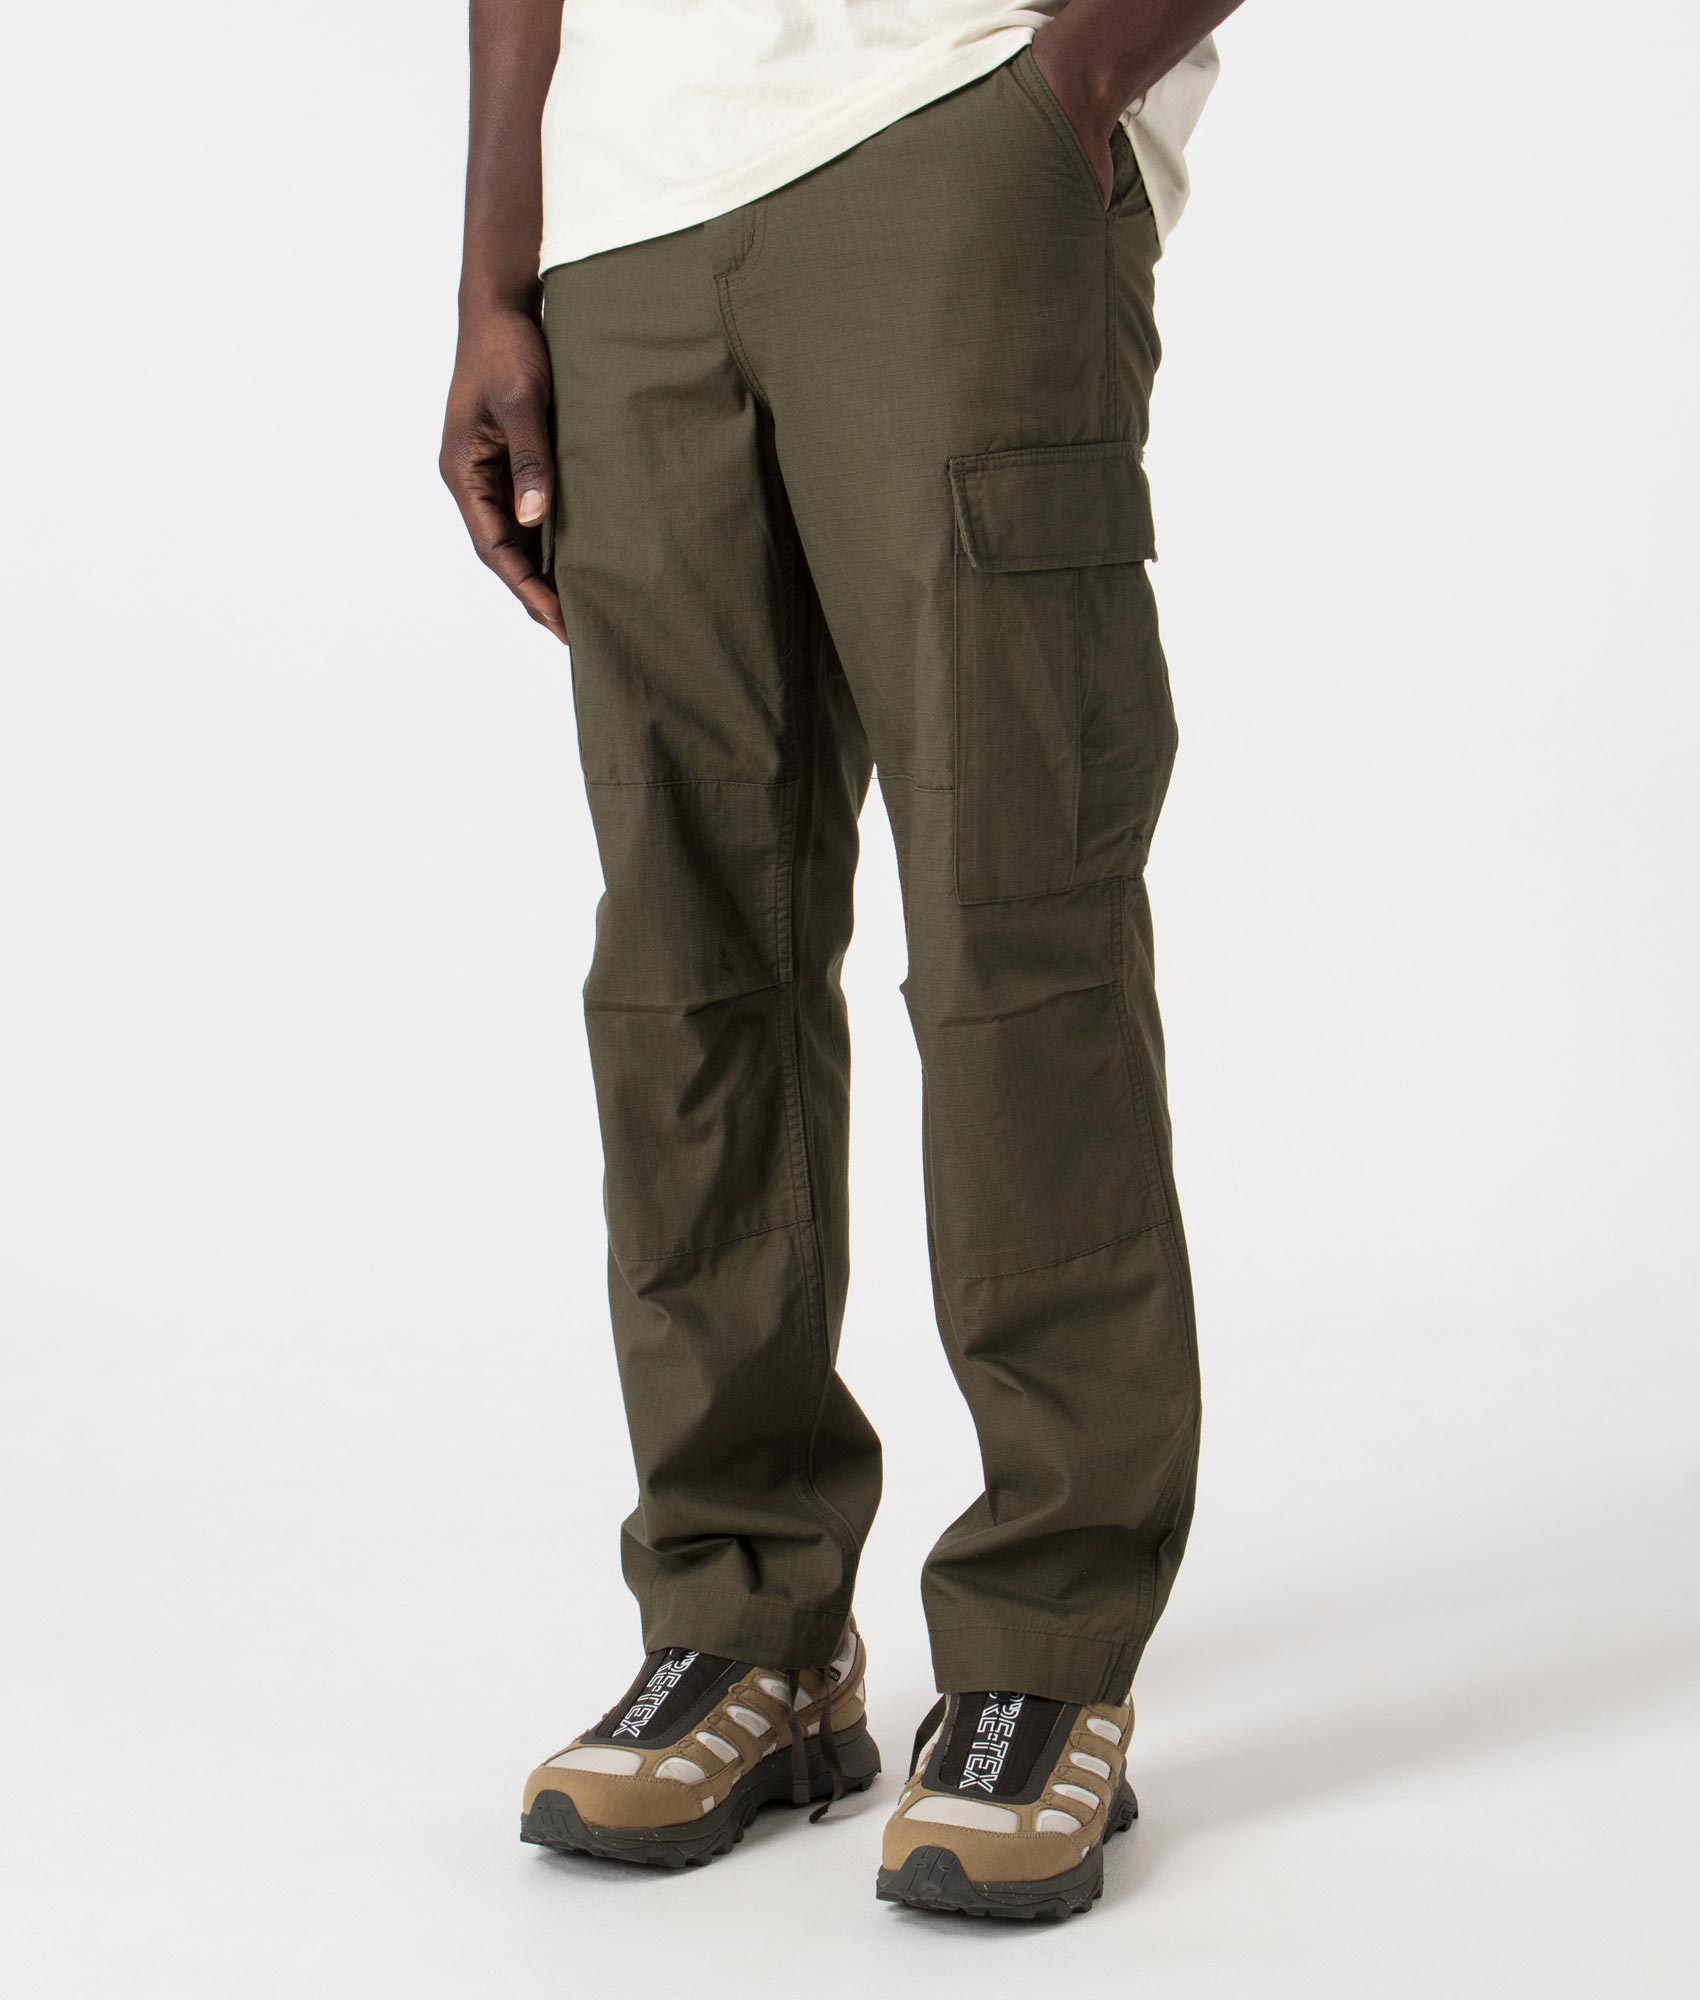 Carhartt WIP Mens Regular Fit Cargo Pants - Colour: 6302 Cypress Rinsed - Size: 32S